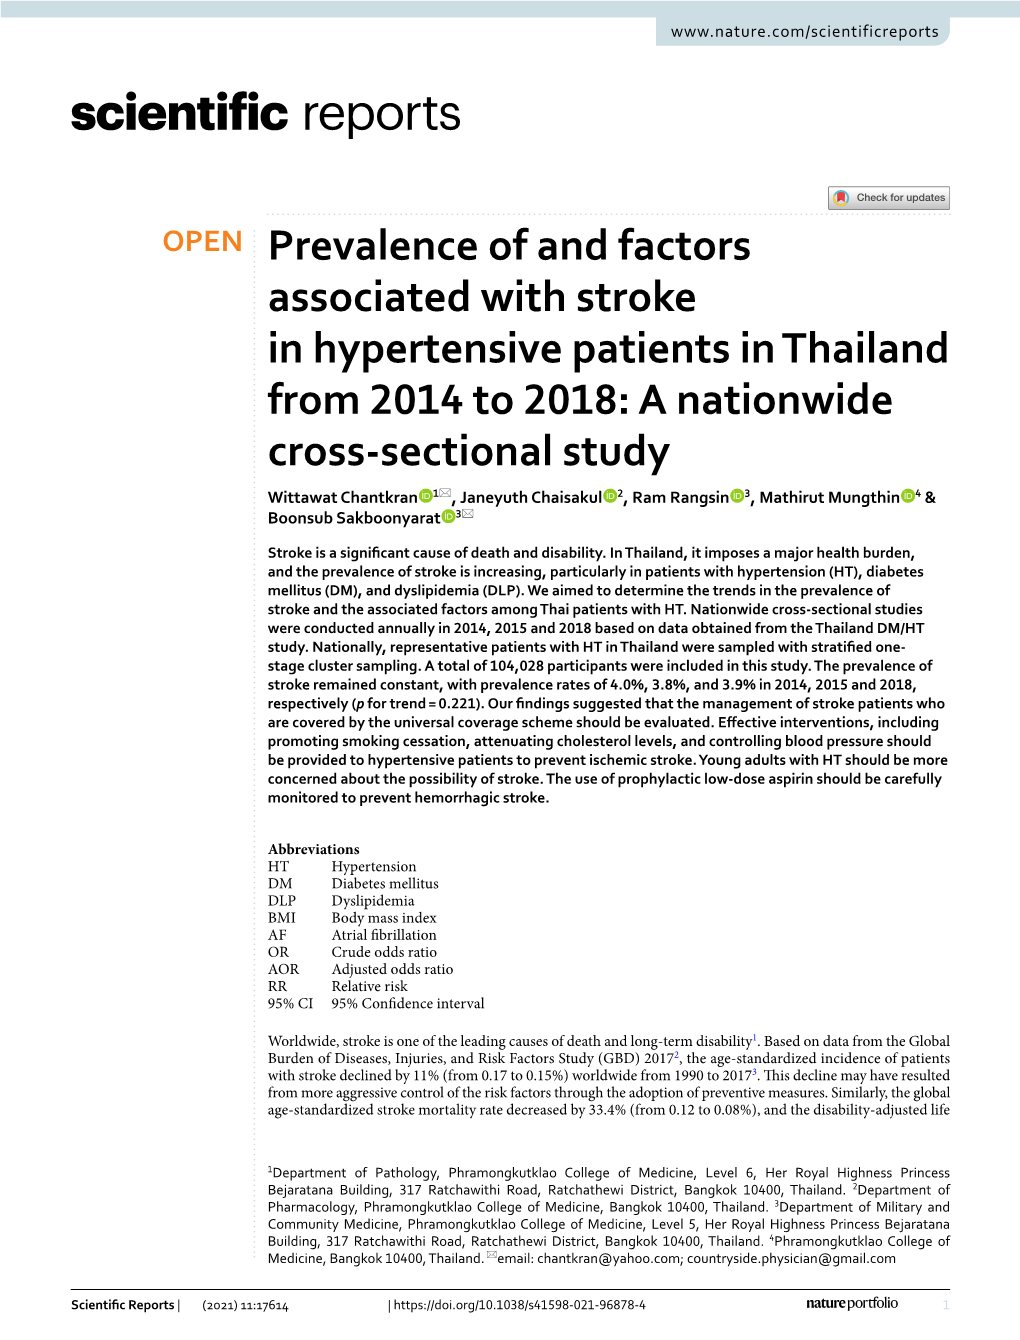 Prevalence of and Factors Associated with Stroke in Hypertensive Patients